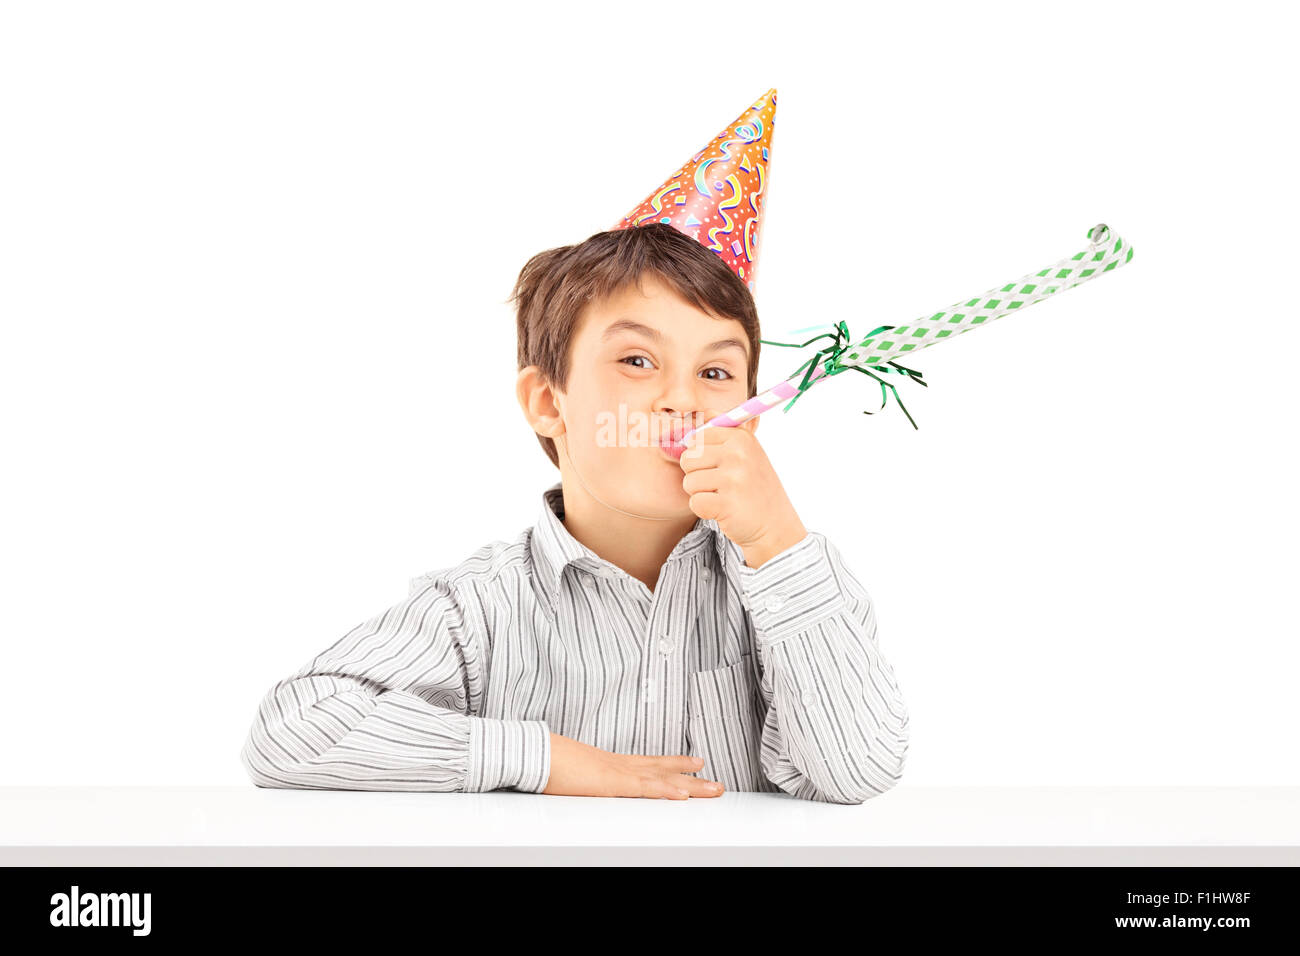 Little kid with party hat sitting at a table and blowing a favor horn isolated on white background Stock Photo